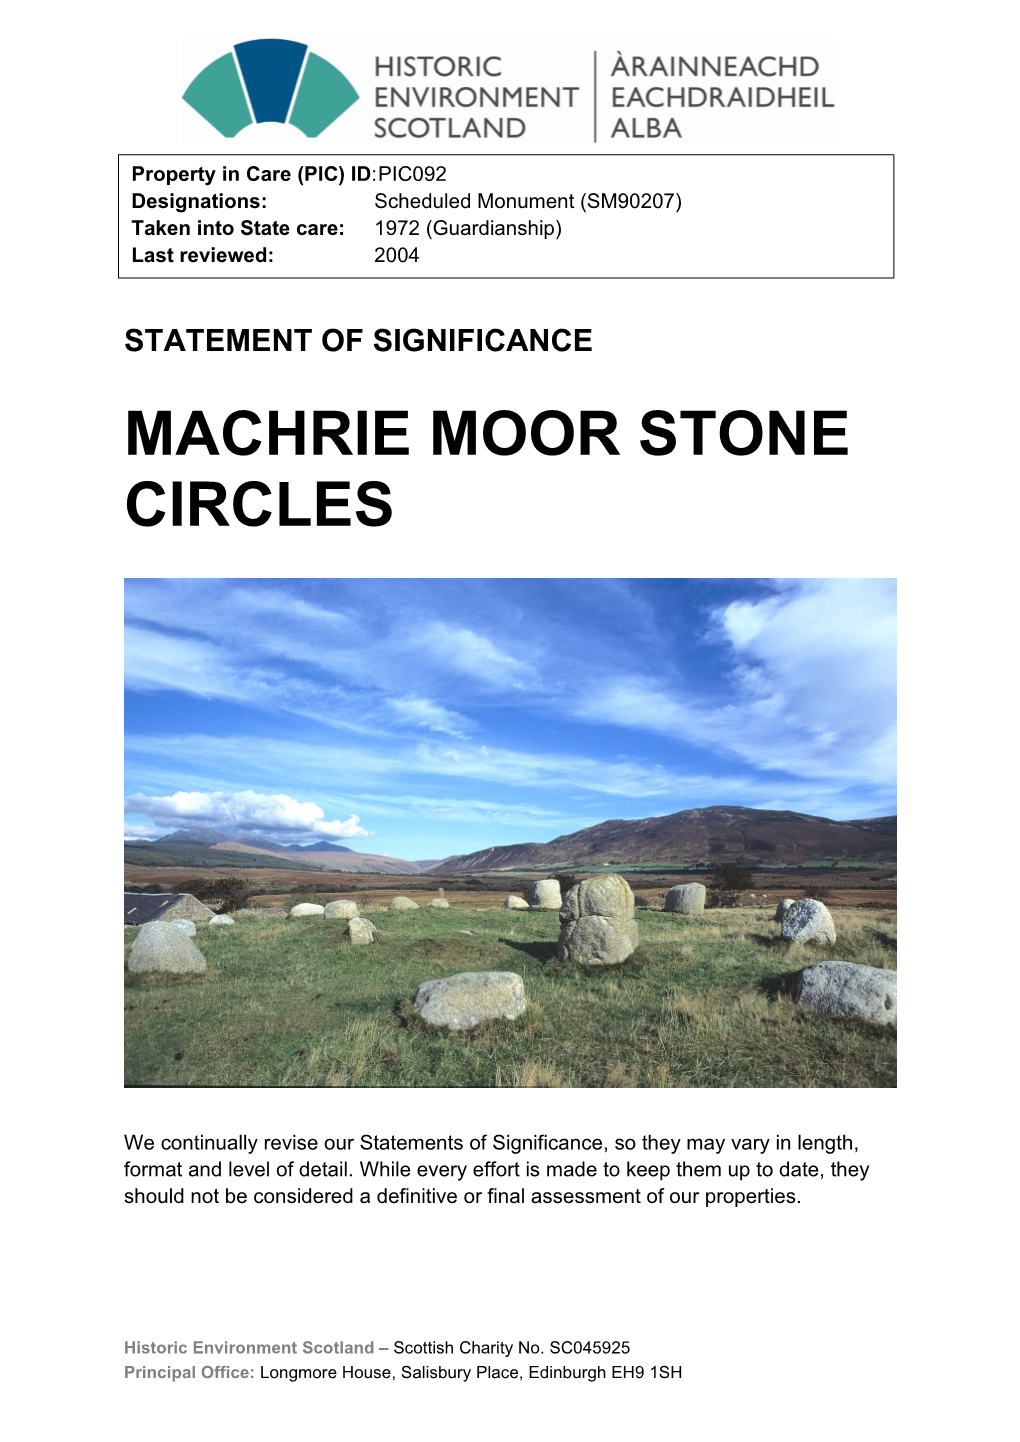 Machrie Moor Stone Circles Statement of Significance